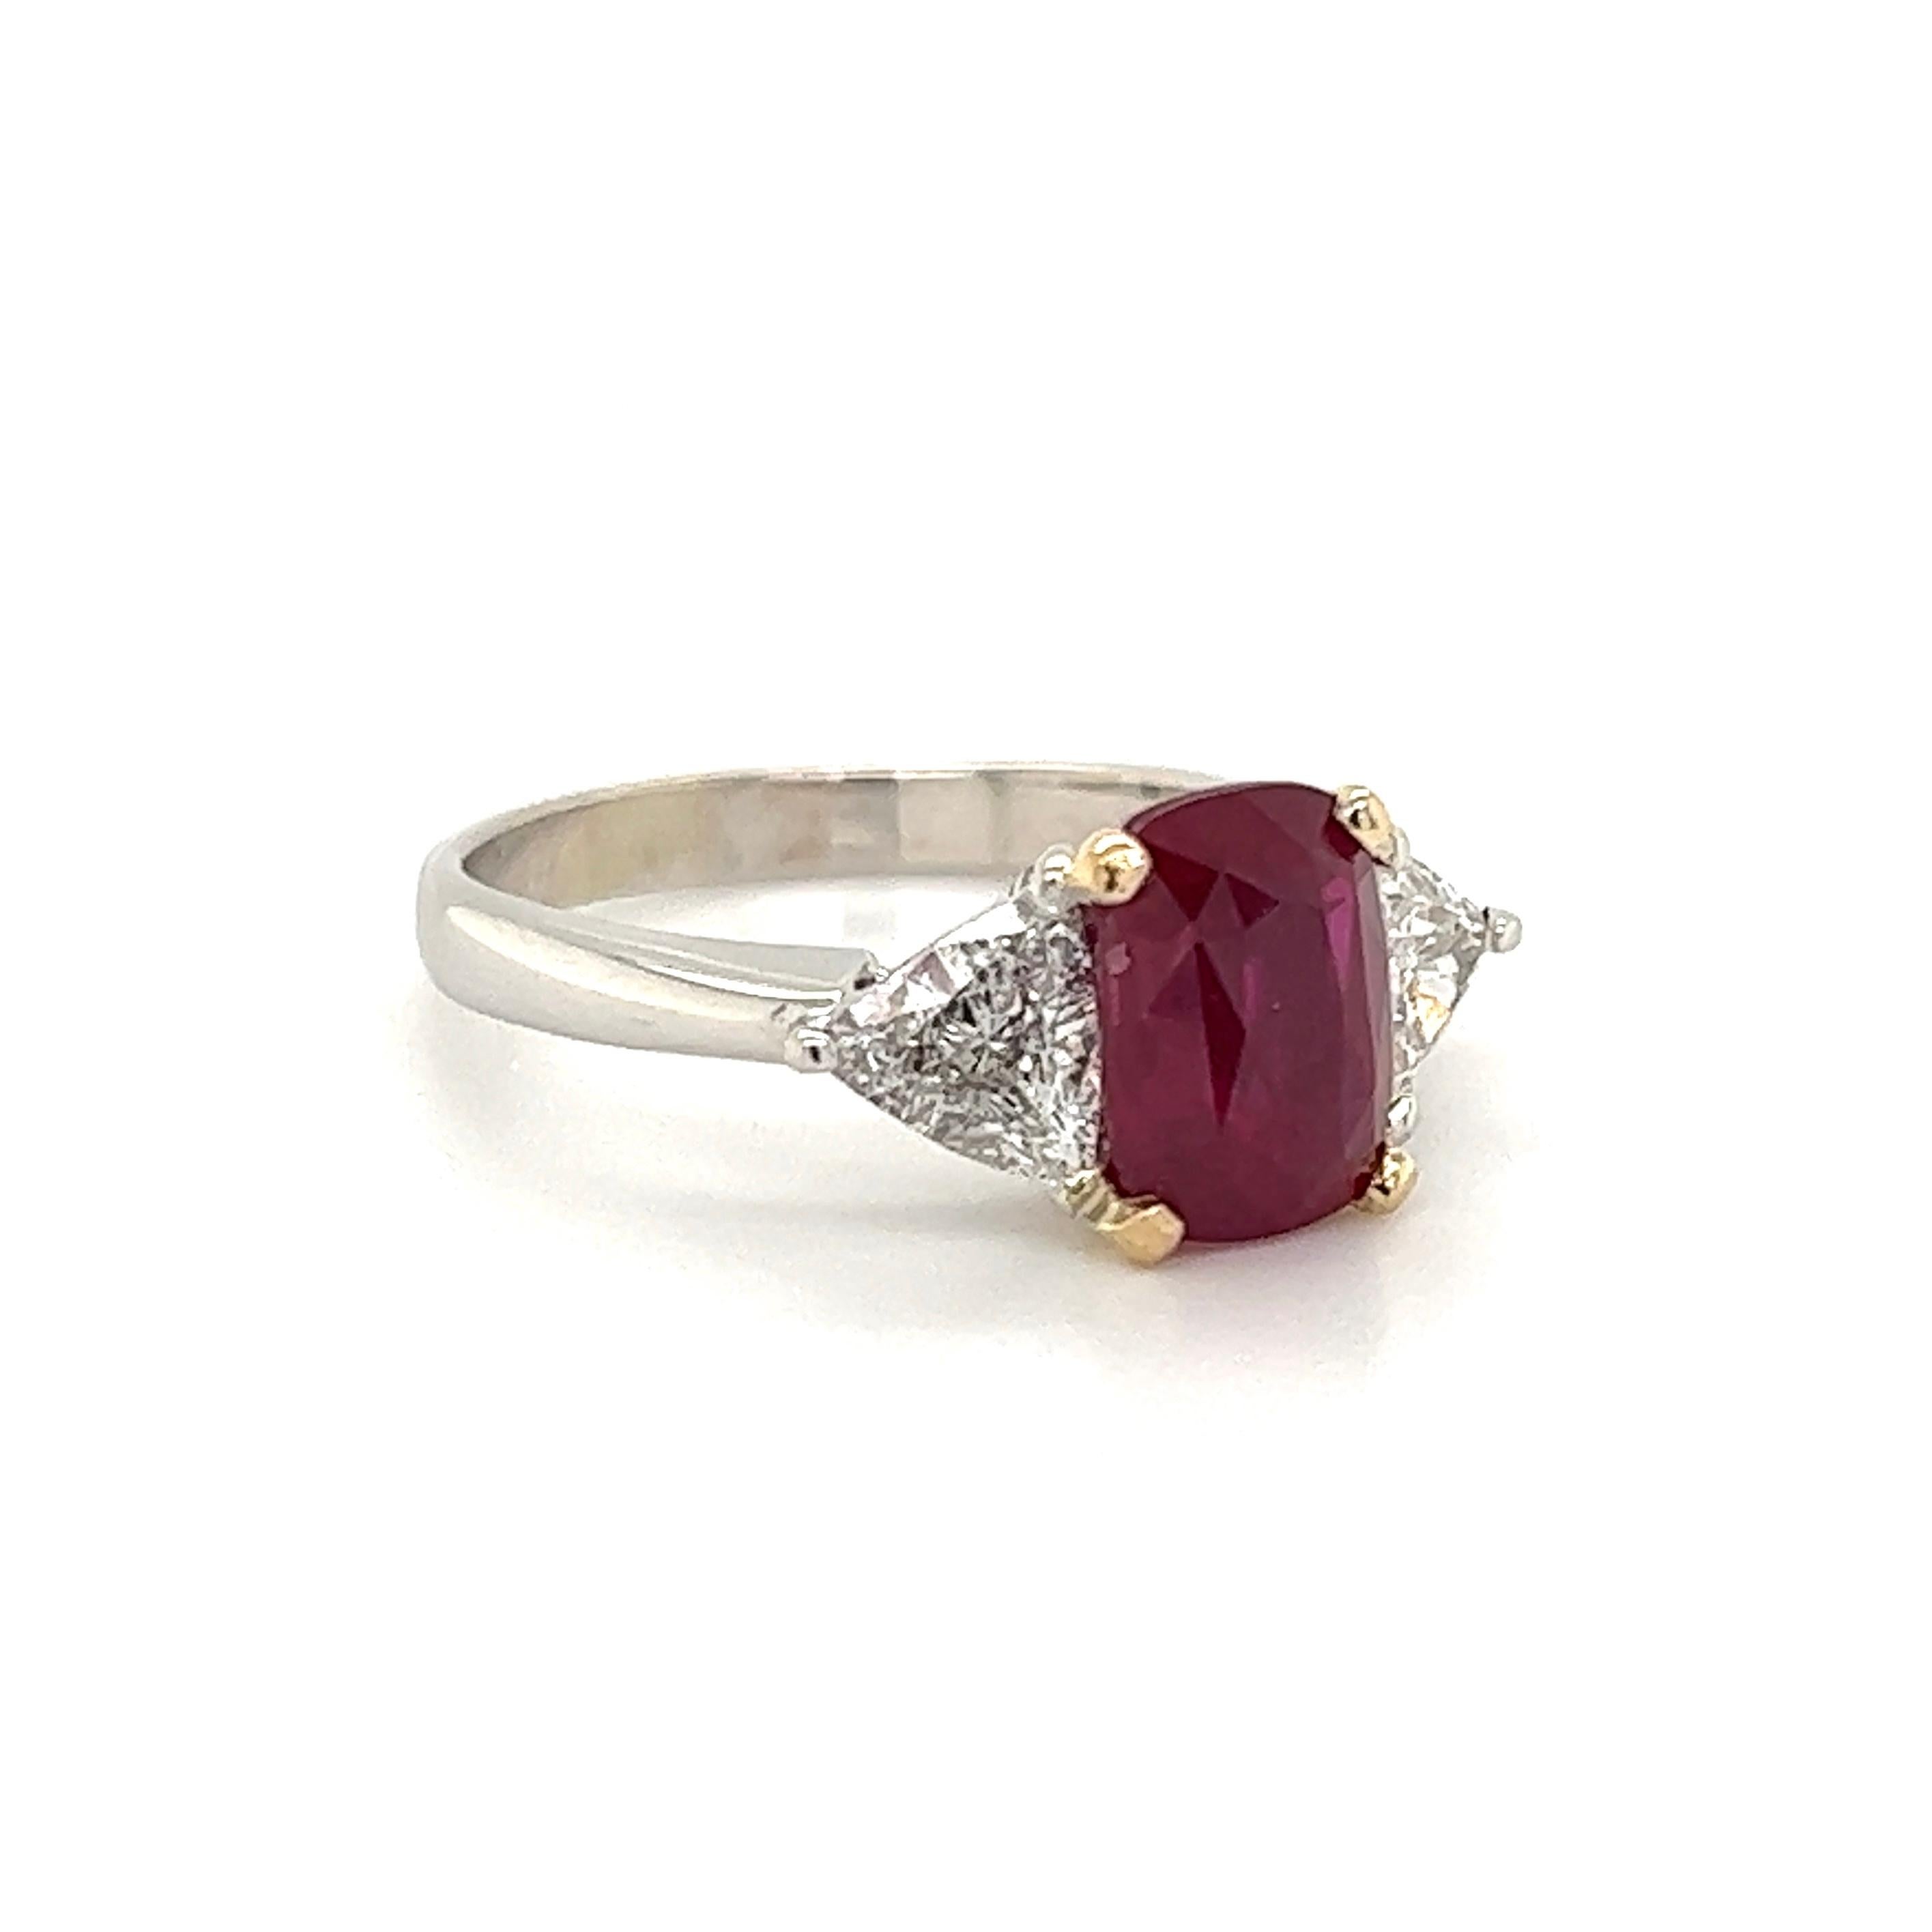 Simply Beautiful! Elegant and finely detailed Art Deco Revival 3-Stone Gold Ring, center securely nestled with an Antique Cut Ruby GIA, weighing approx. 2.80 Carats with a Trillion Diamond on either side; weighing approx. 0.60tcw. The ring is Hand